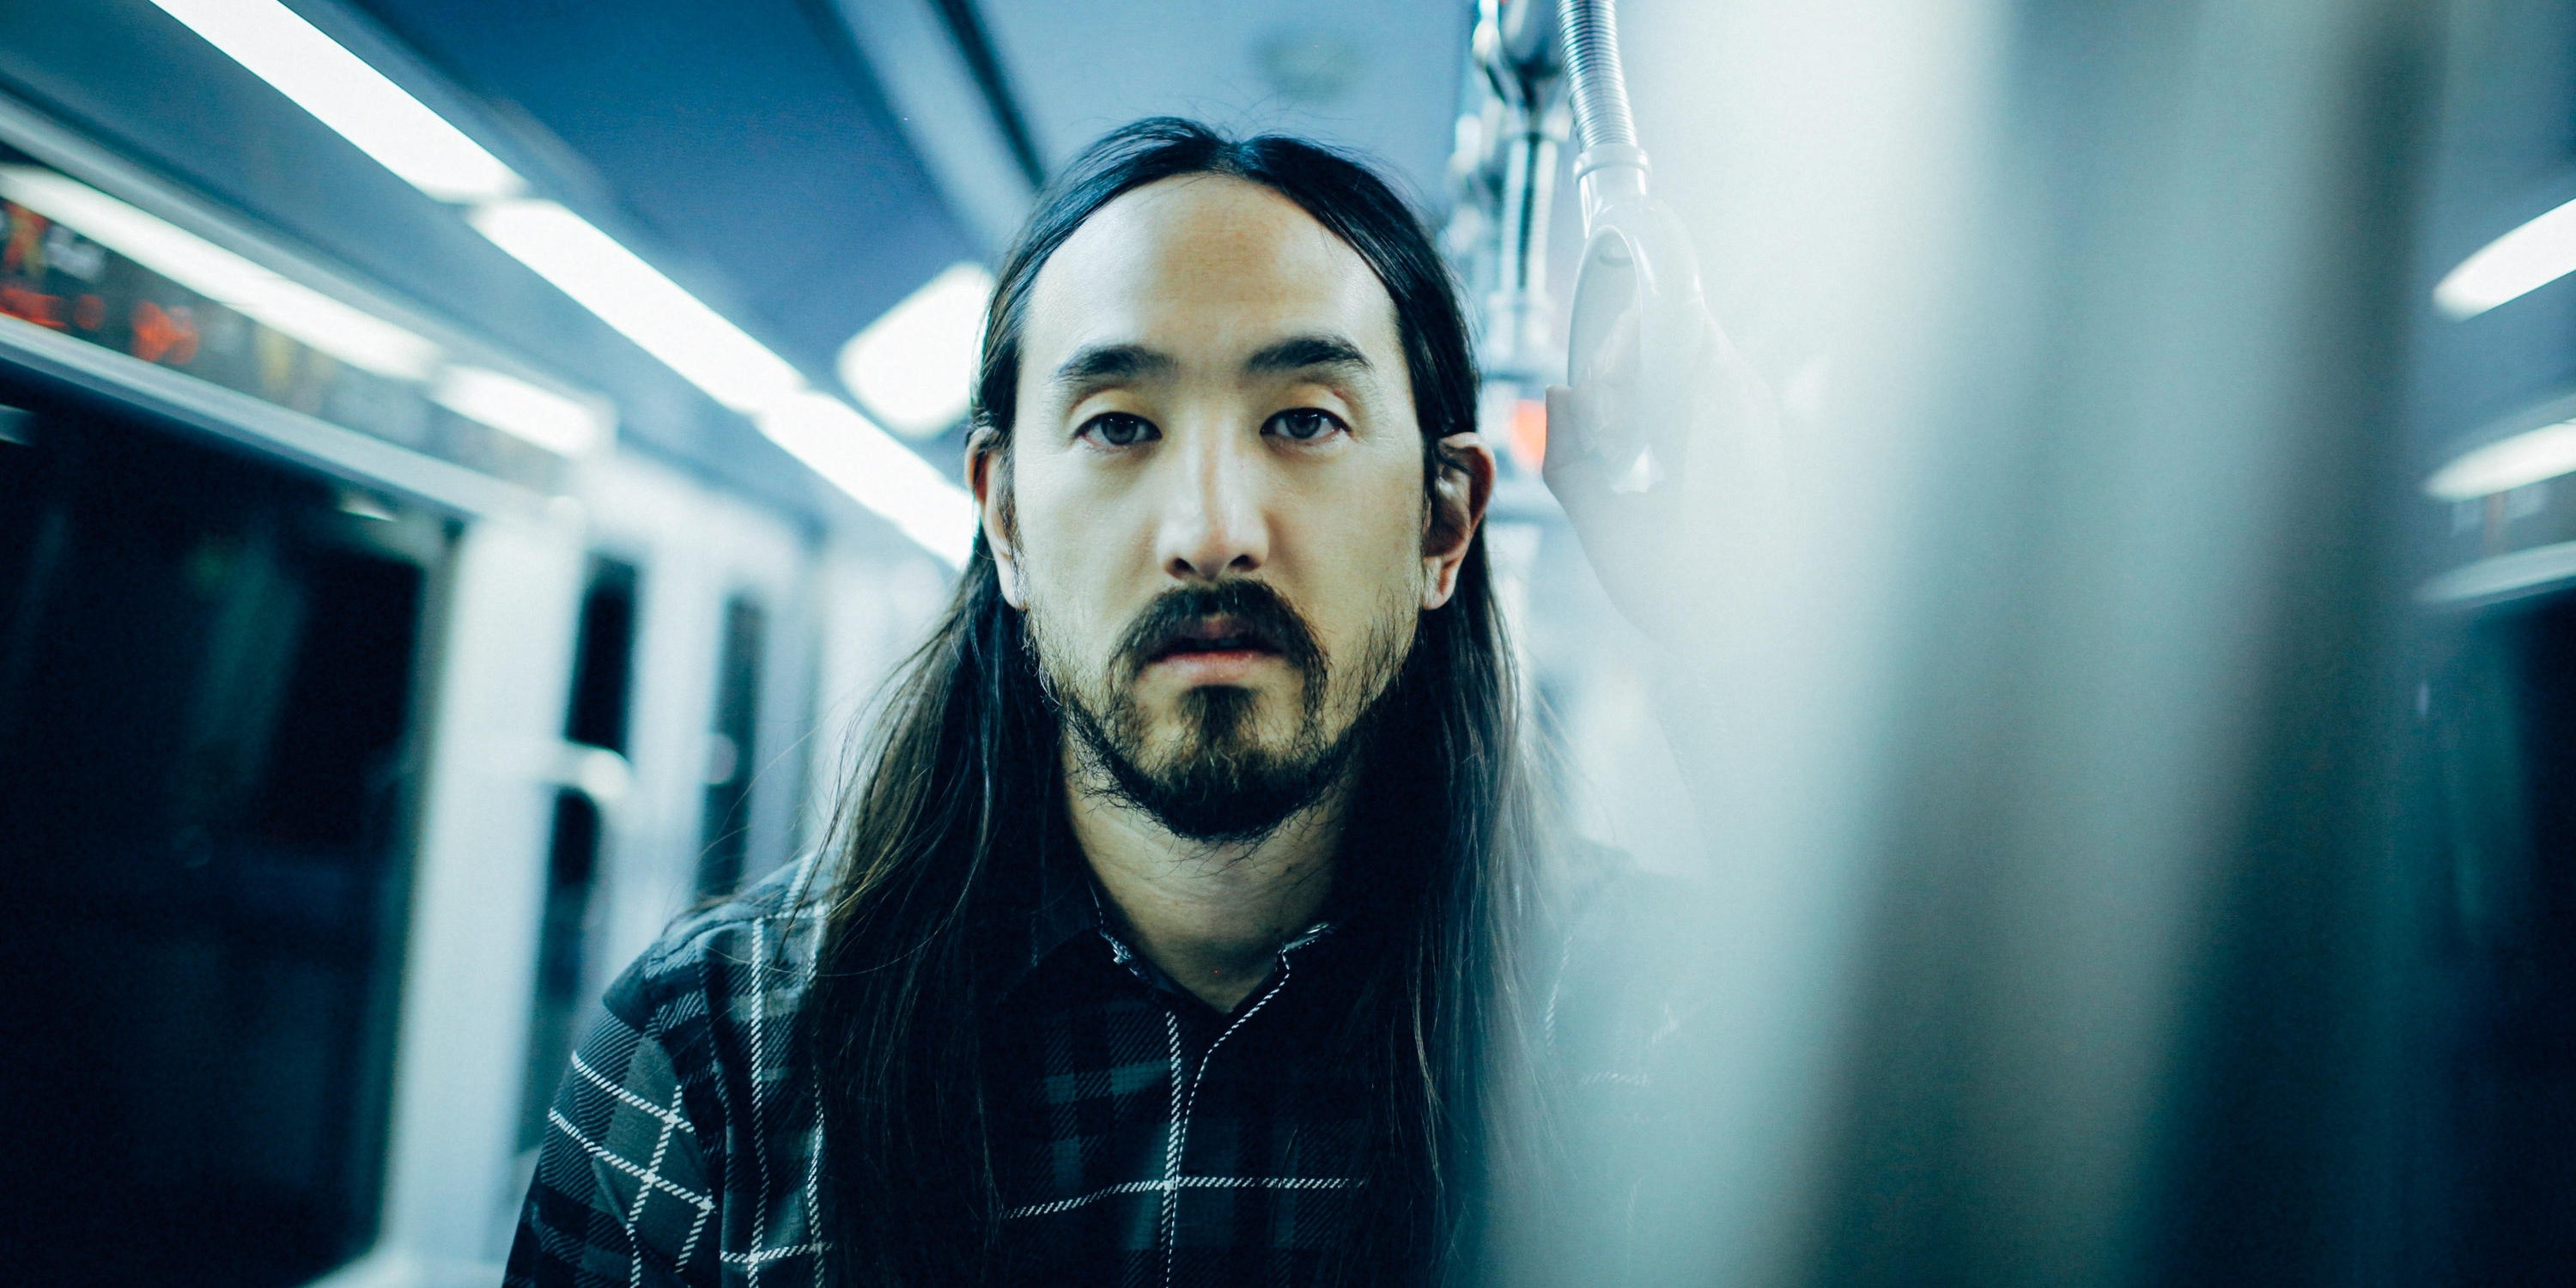 Steve Aoki to perform at Marquee Singapore this January